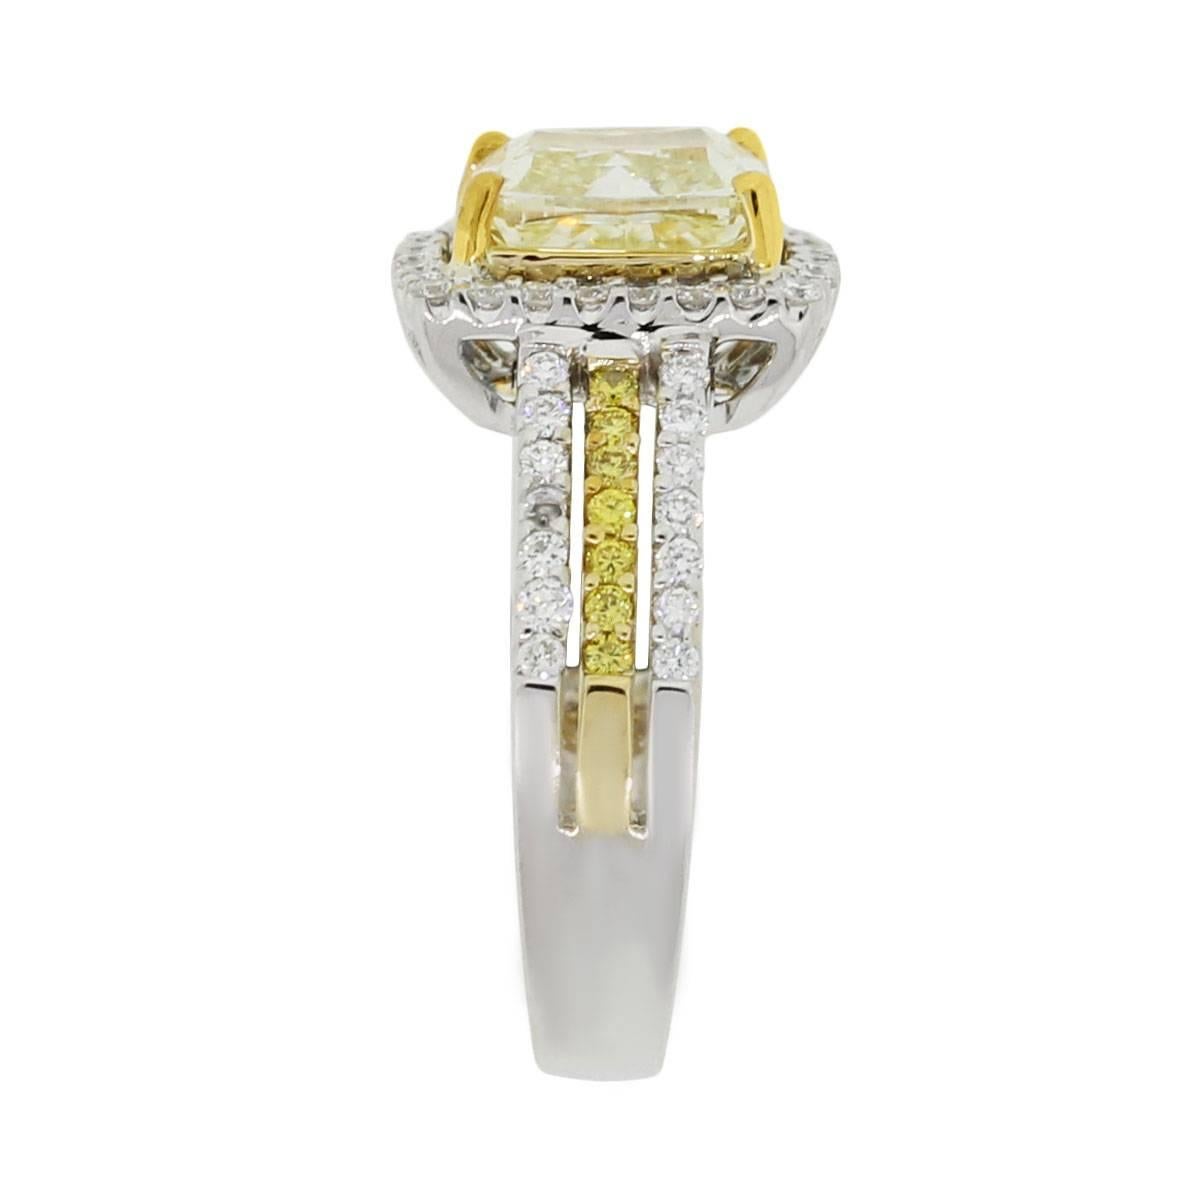 Material: 18k white gold with yellow gold prongs
Center Diamond Details: Cushion cut fancy yellow diamond approximately 2.03ct. Diamond is yellow in color and SI in clarity
Diamond Details: Approximately 1ctw total of round brilliant fancy yellow